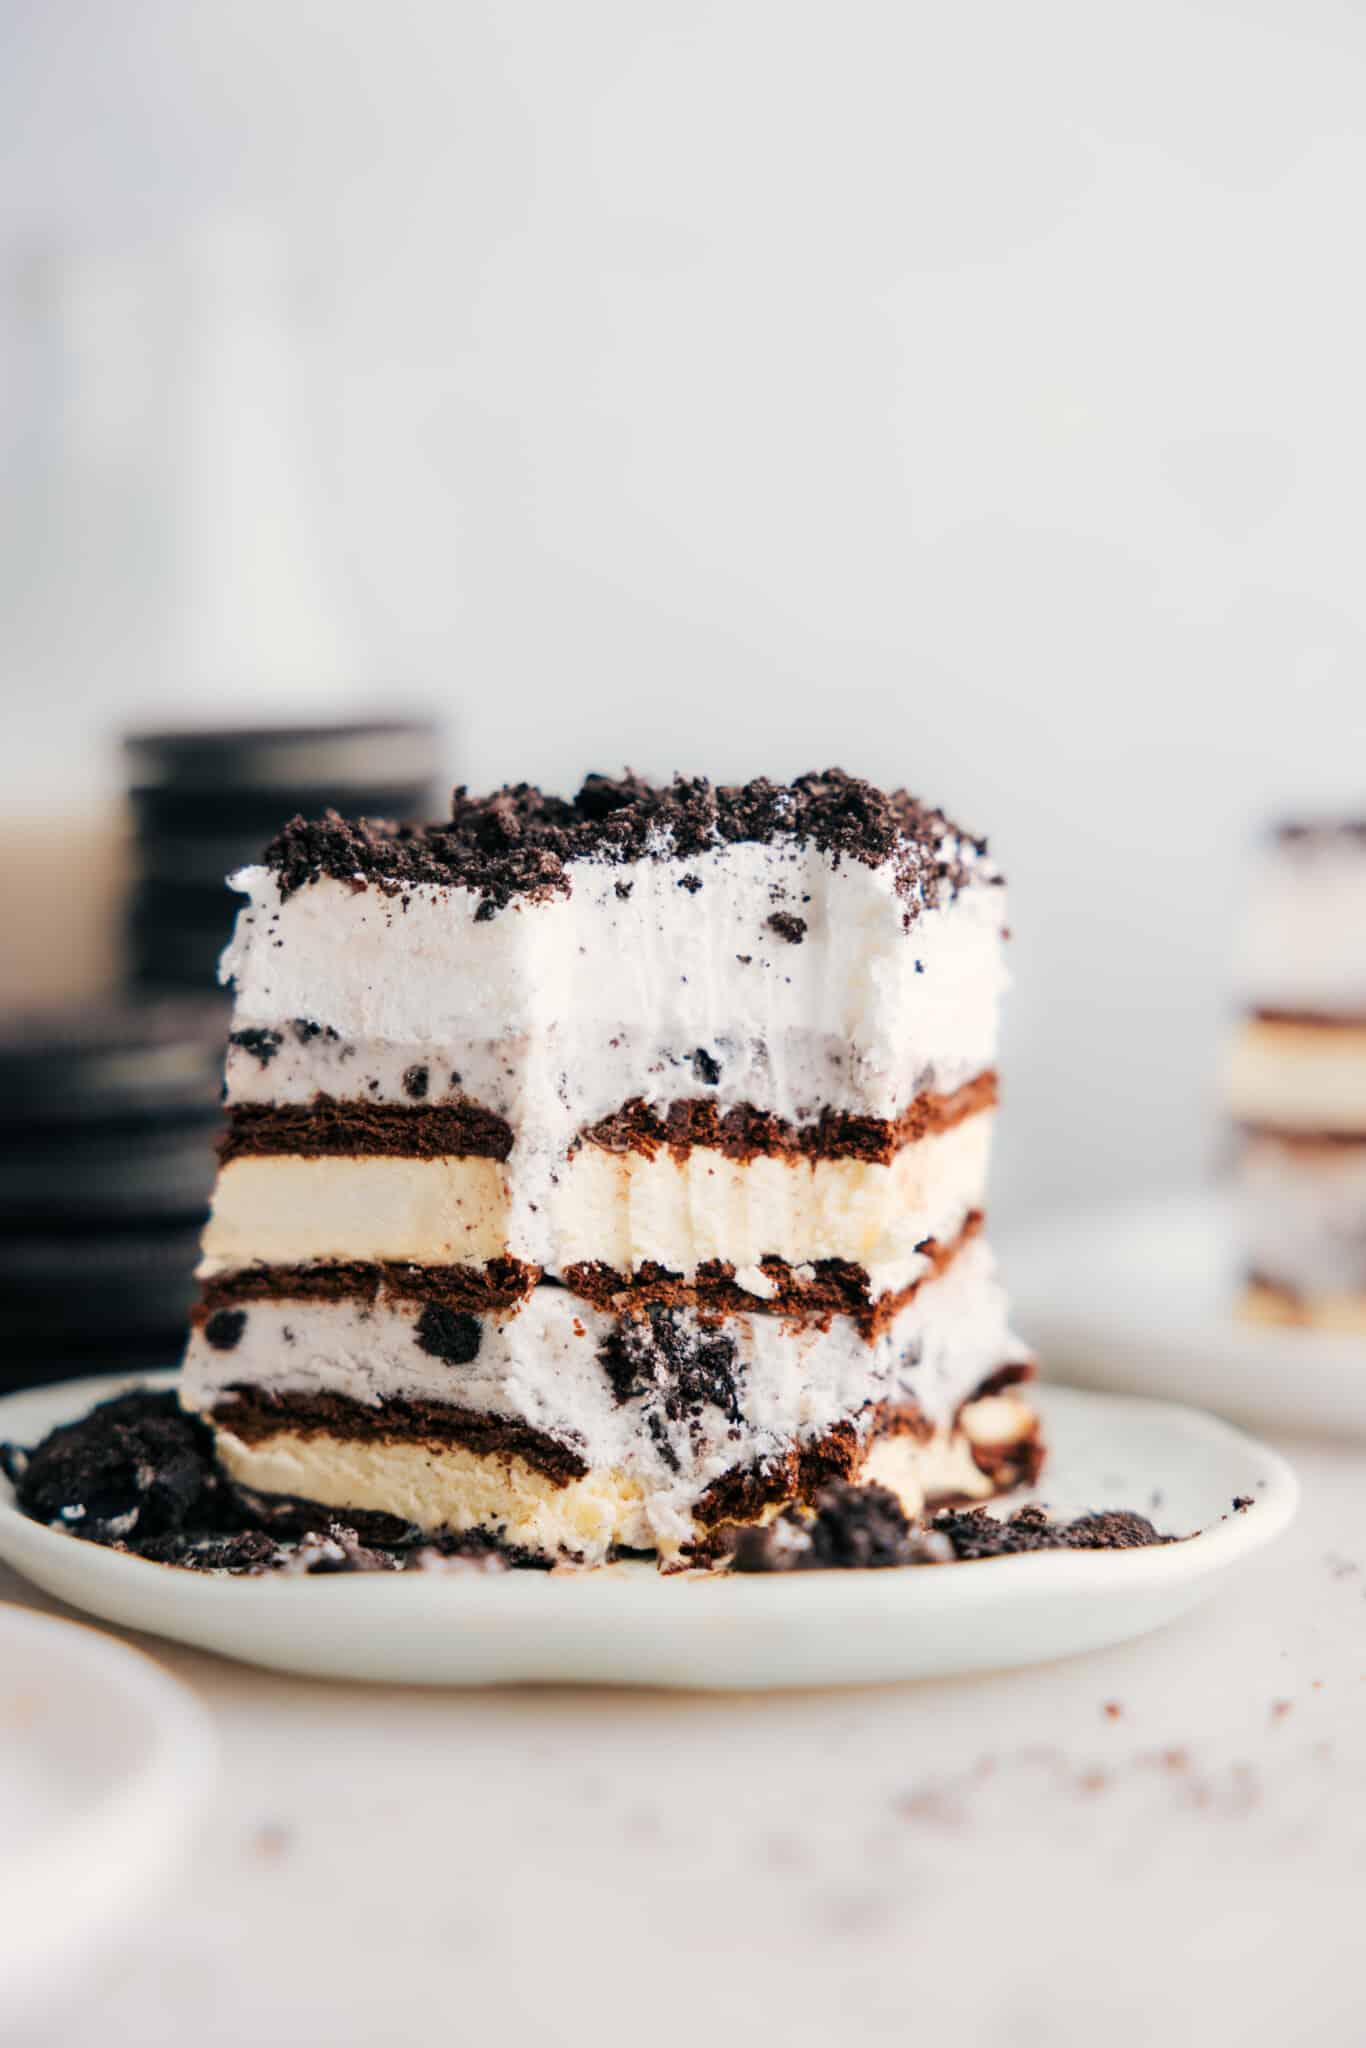 Ice cream sandwich cake with a bite out of it showing all the layers.